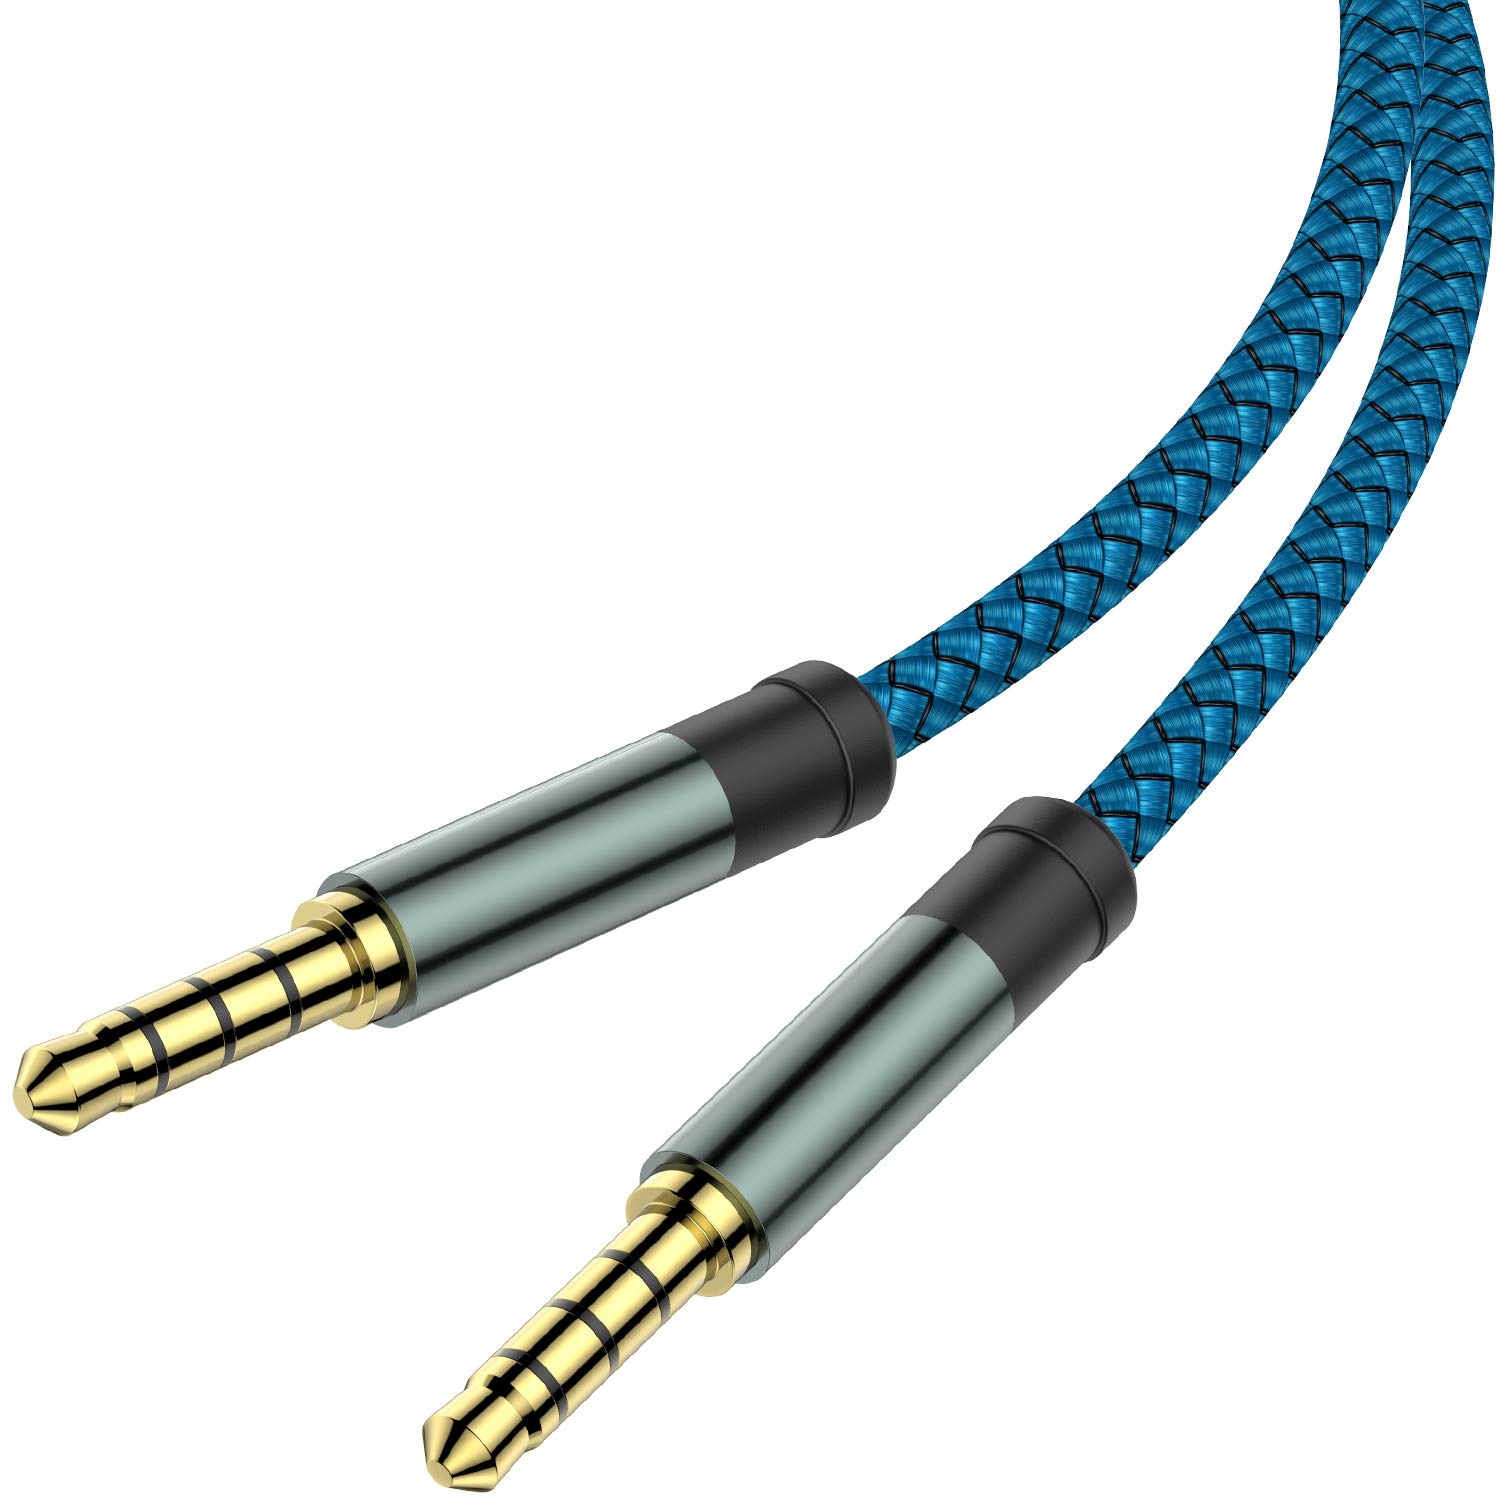 2 Pack TRRS 3.5mm Audio Cable, 5Ft MCSPER 4-Conductor [...]